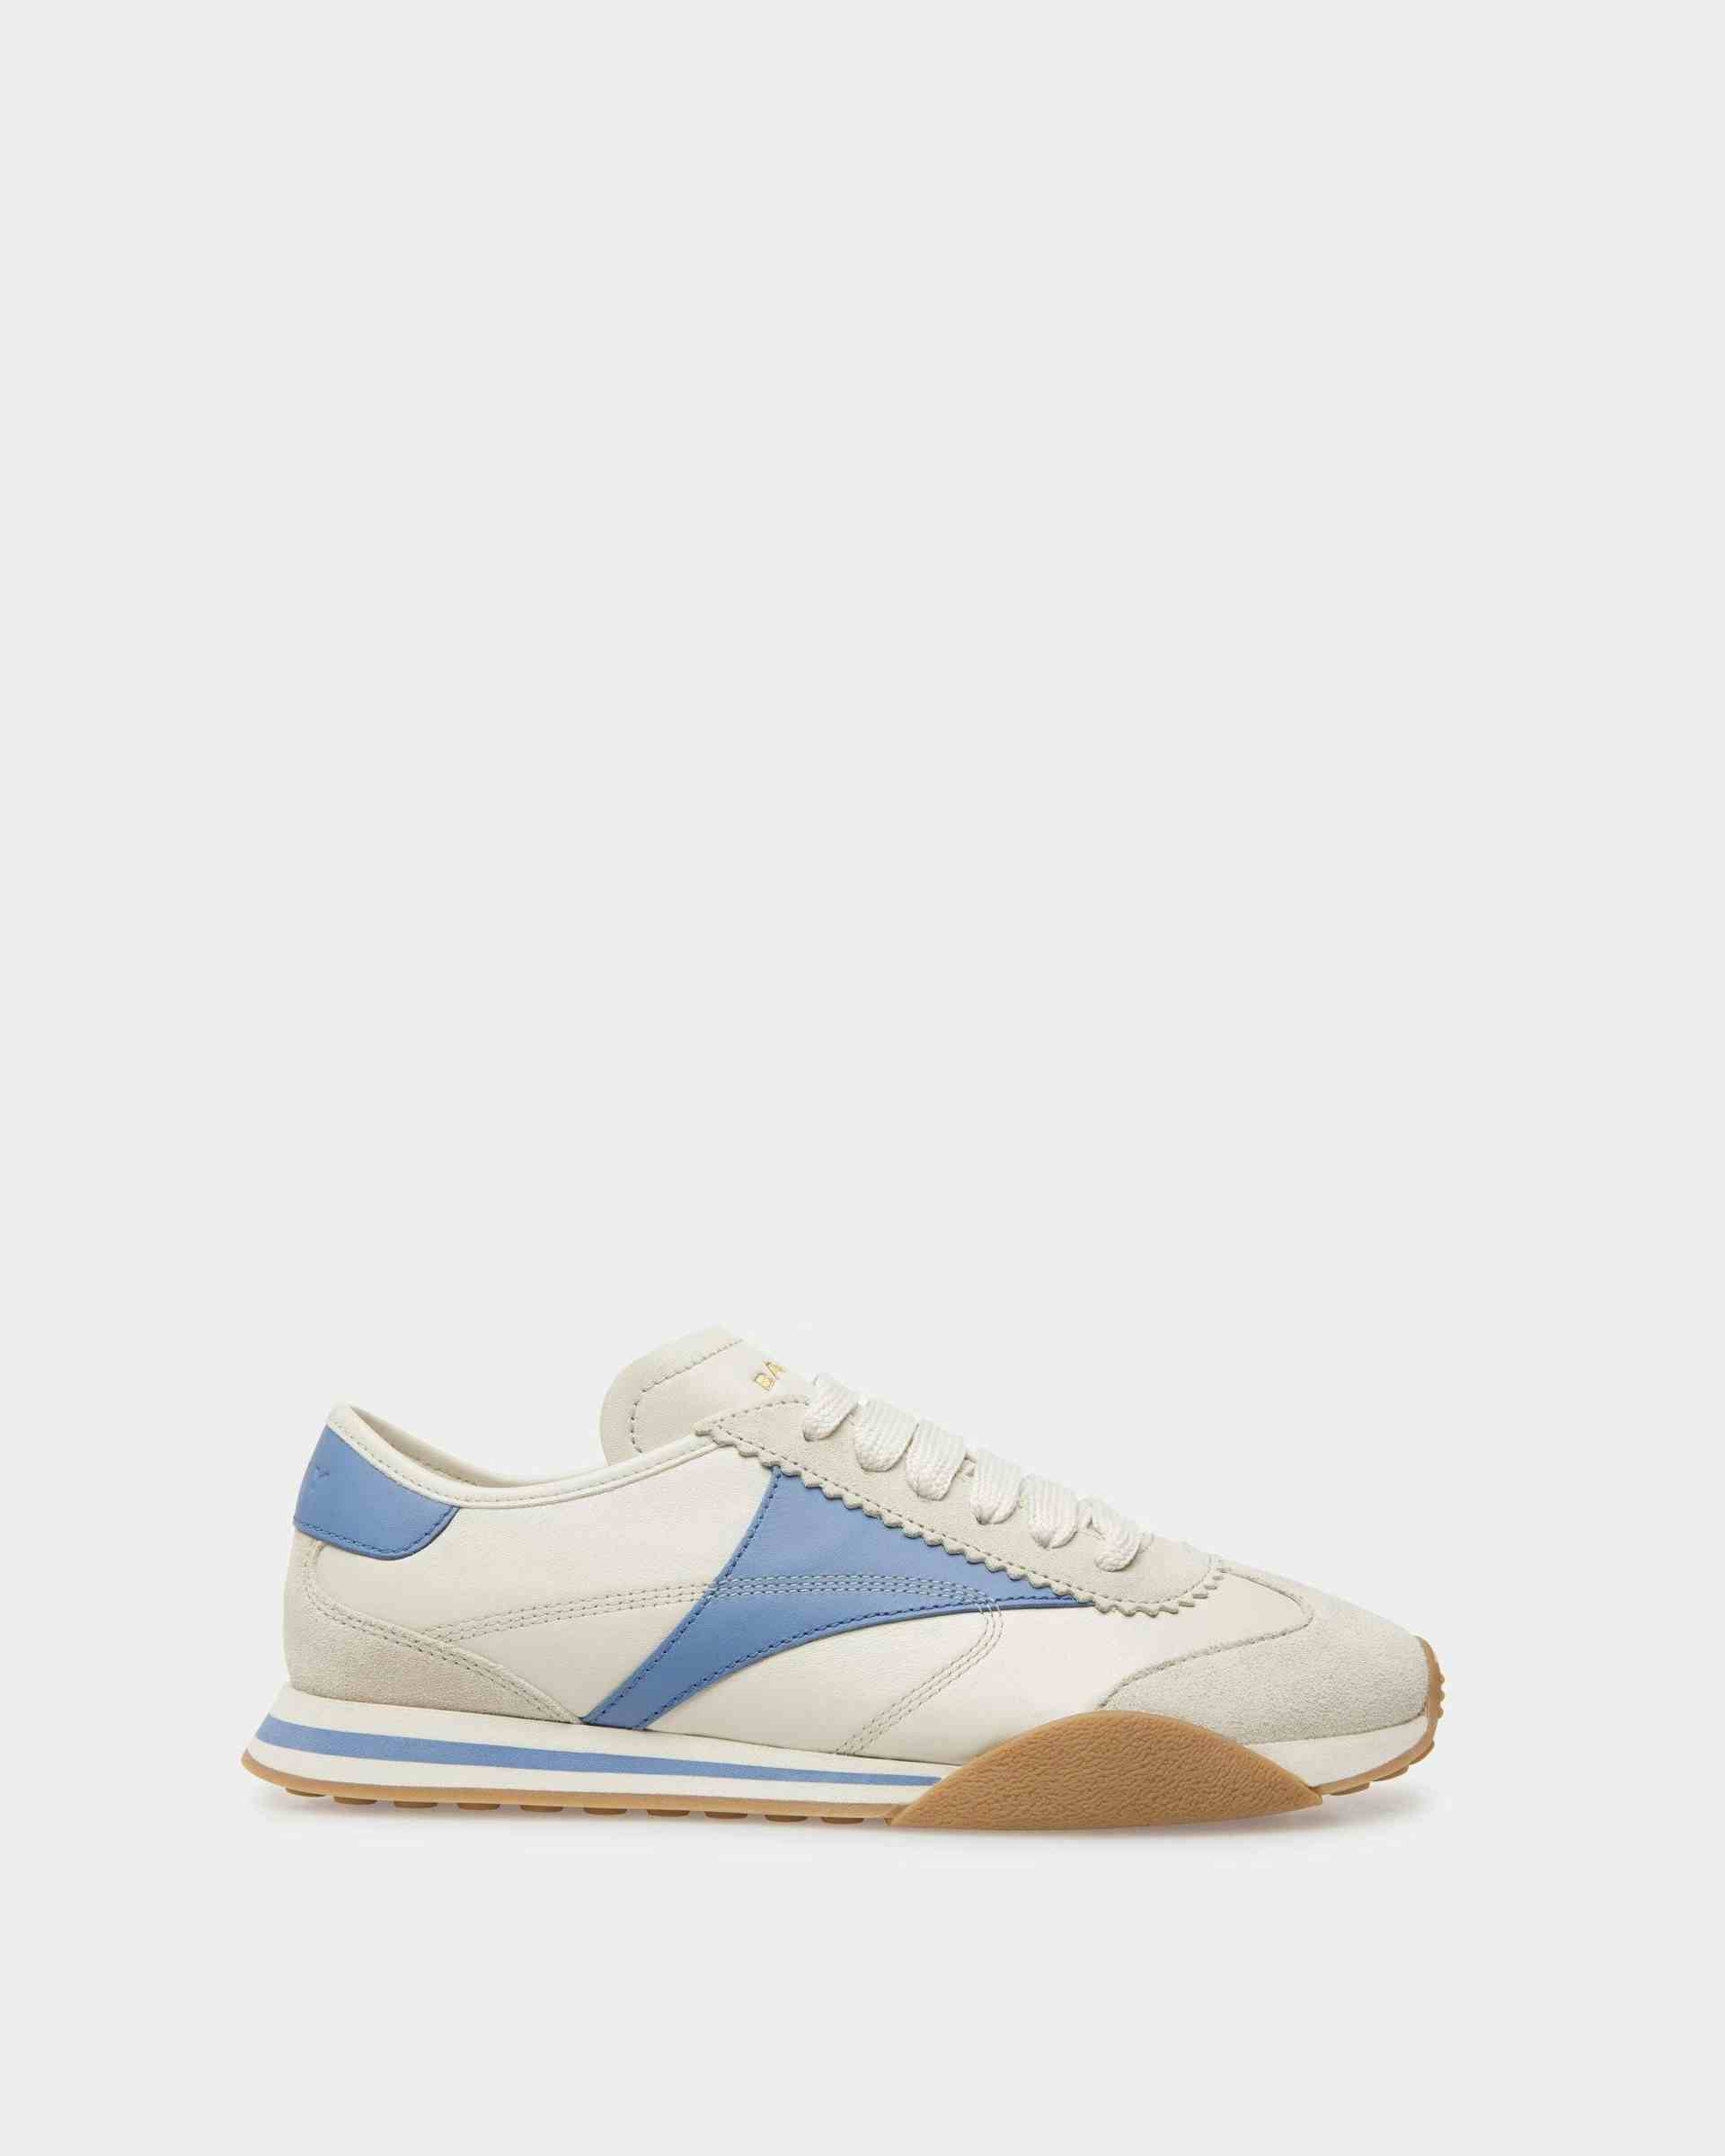 Sussex Sneakers In Dusty White And Blue Leather - Women's - Bally